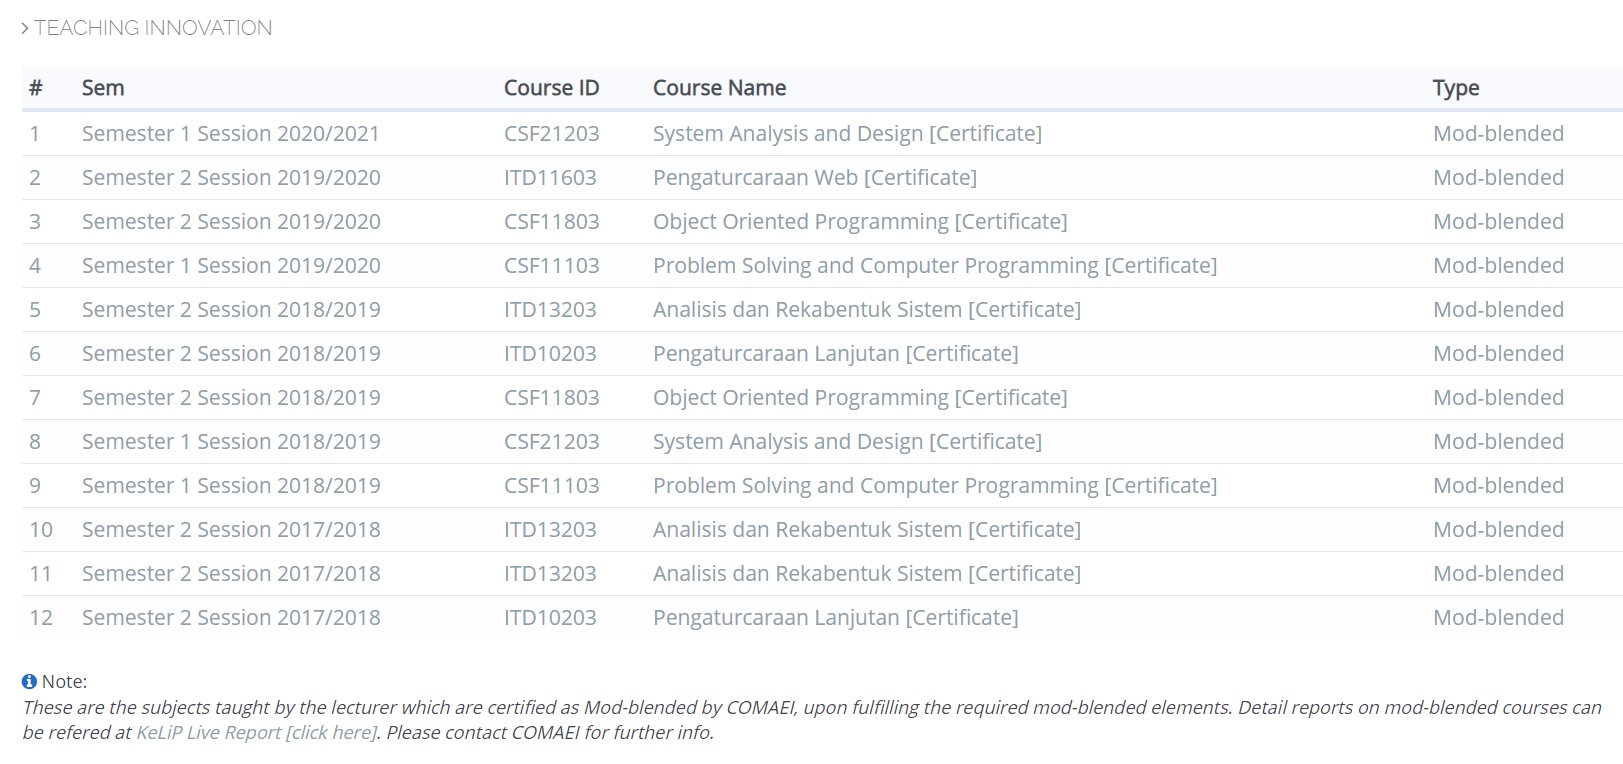 ALL SUBJECT TAUGHT ARE CERTIFIED AS MODE BLENDED